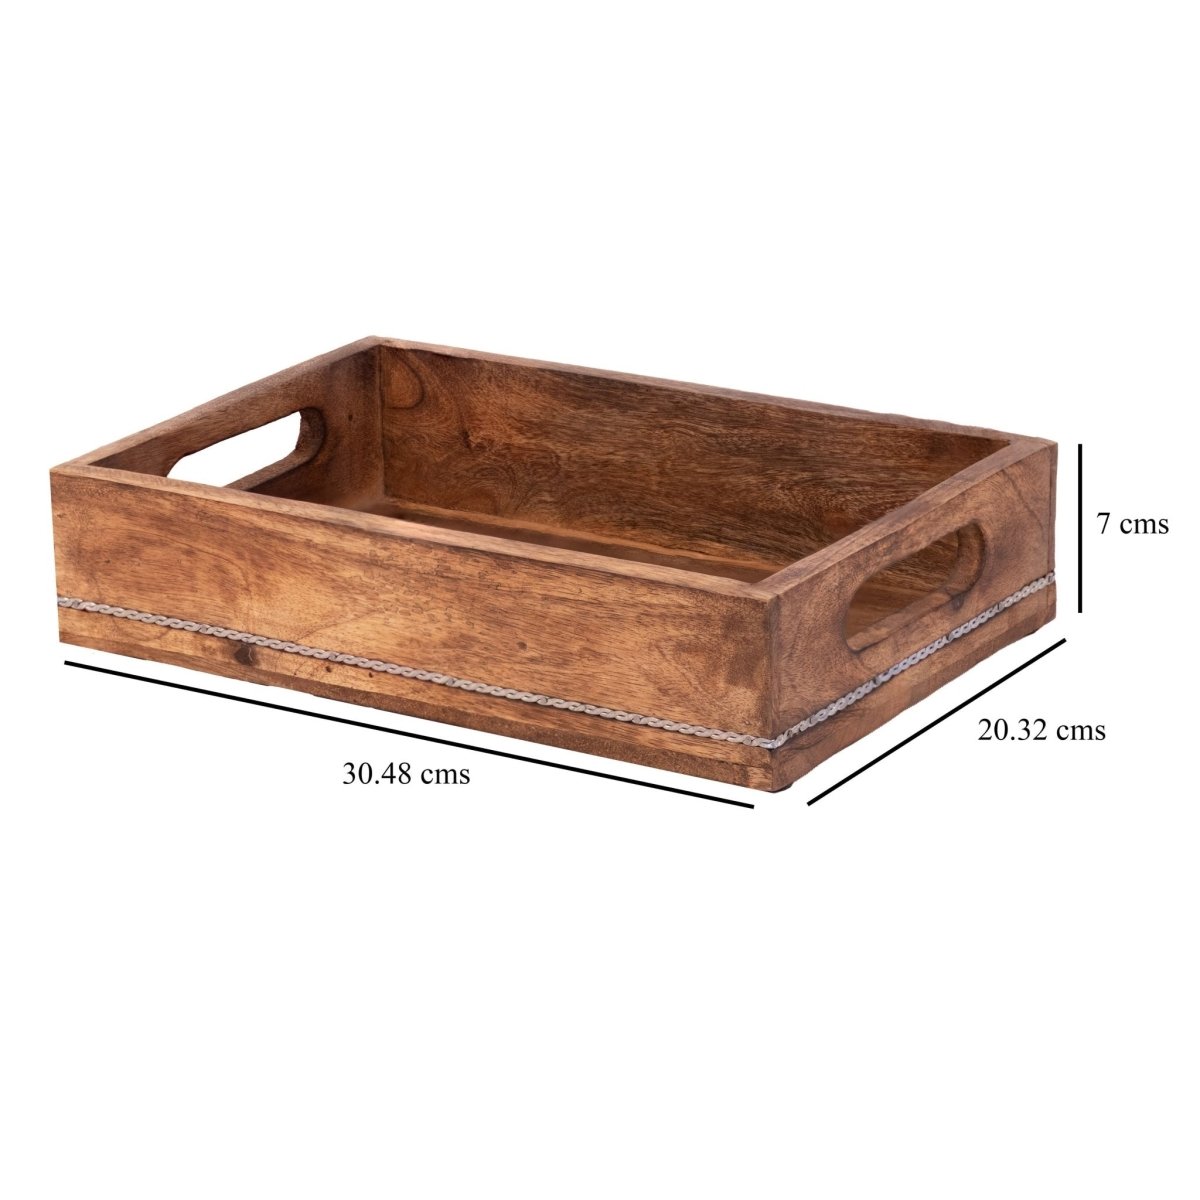 Handcrafted Serving Tray: Perfect for Dining Table & Kitchen